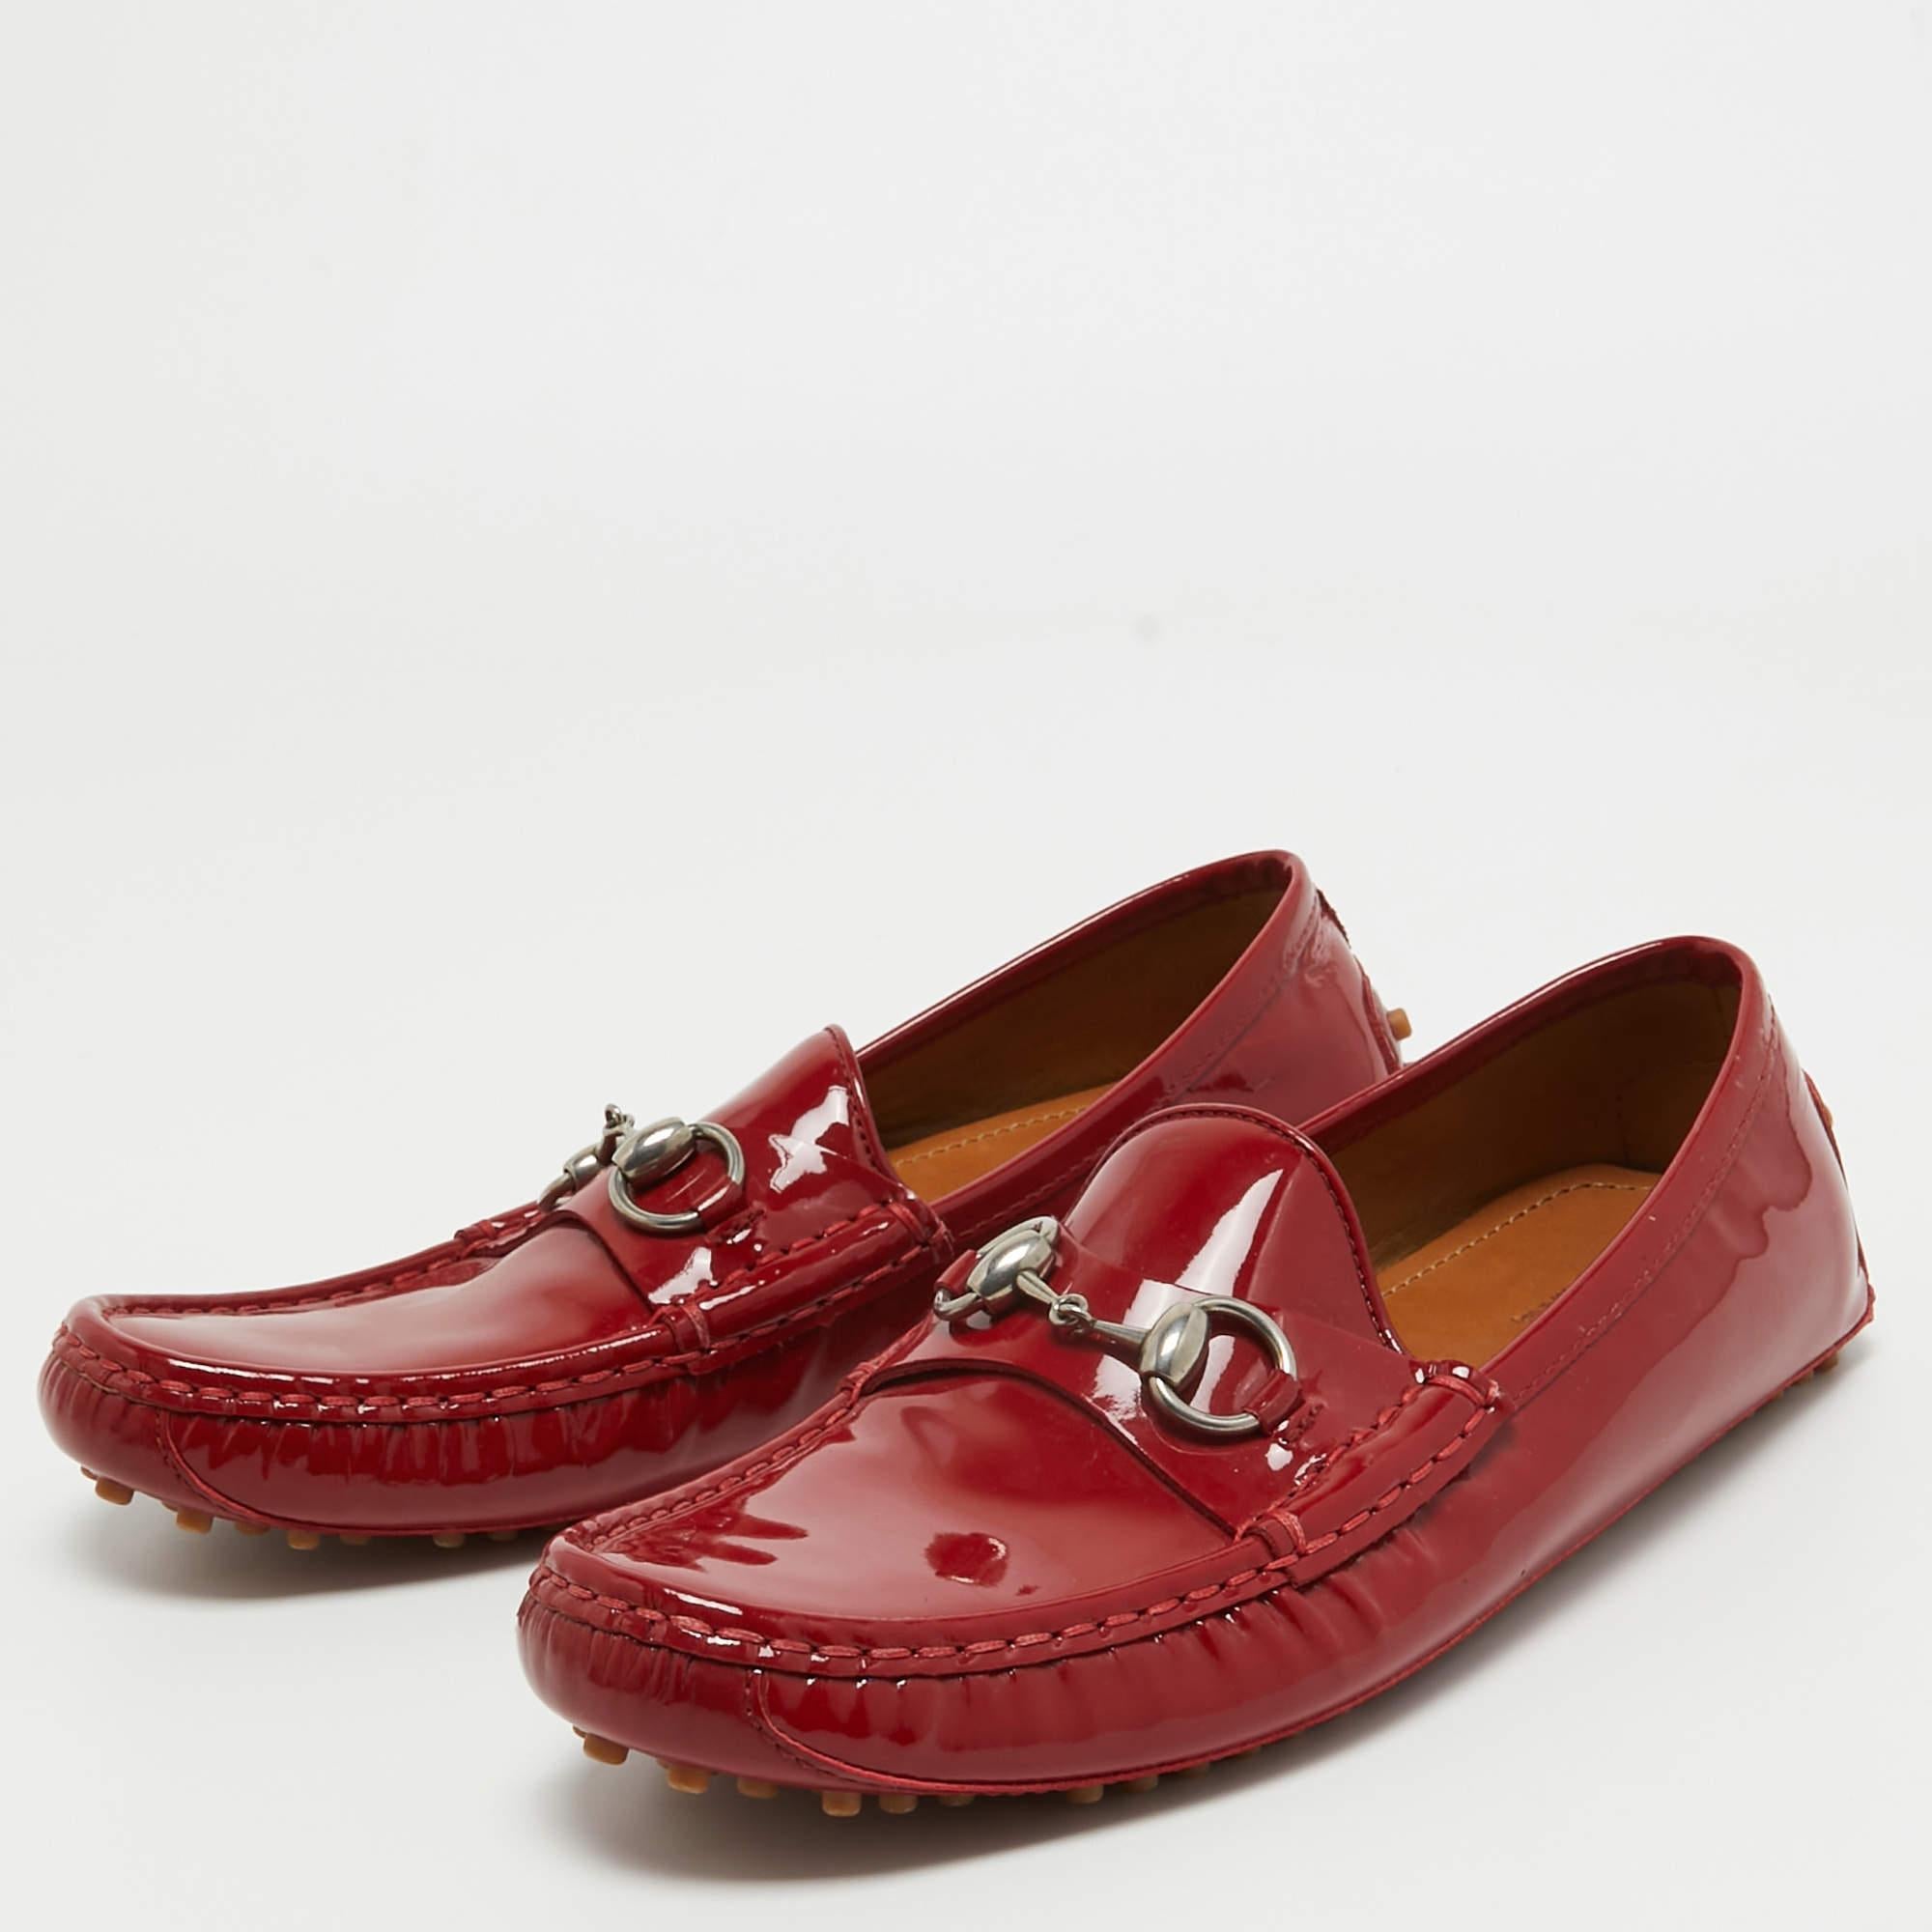 Practical, fashionable, and durable—these Gucci red loafers are carefully built to be fine companions to your everyday style. They come made using the best materials to be a prized buy.

